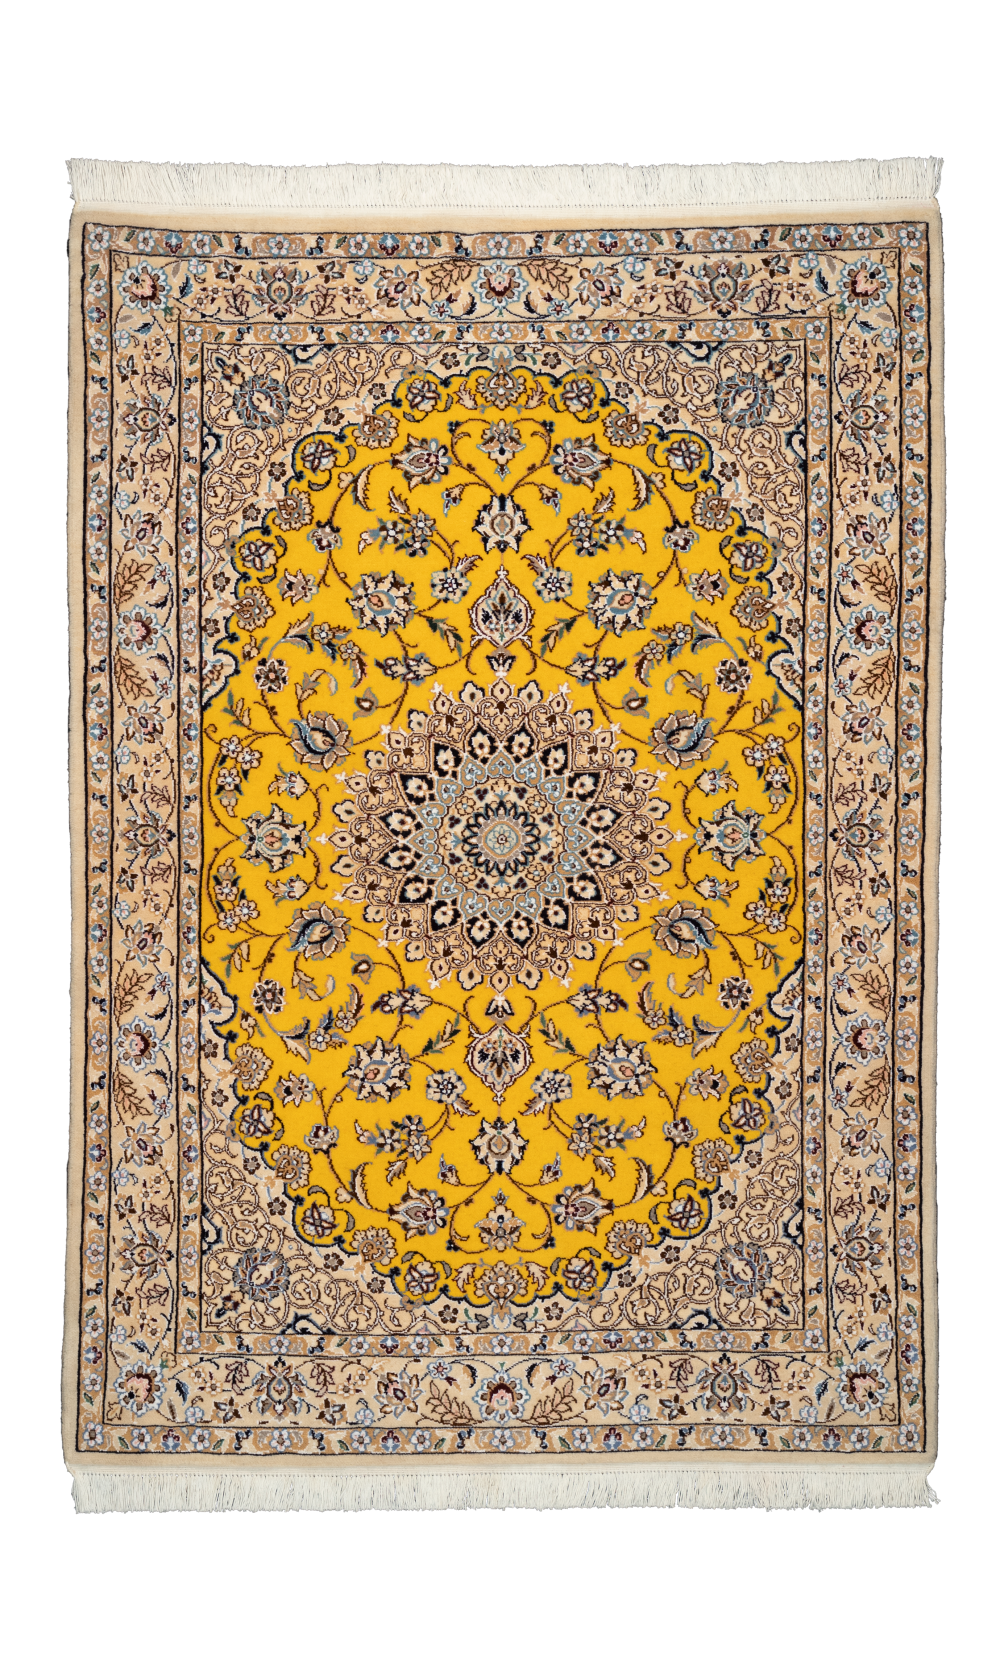 Get the Handmade Rug In Wool & yellow color Naeen Isfahan | 155 x108